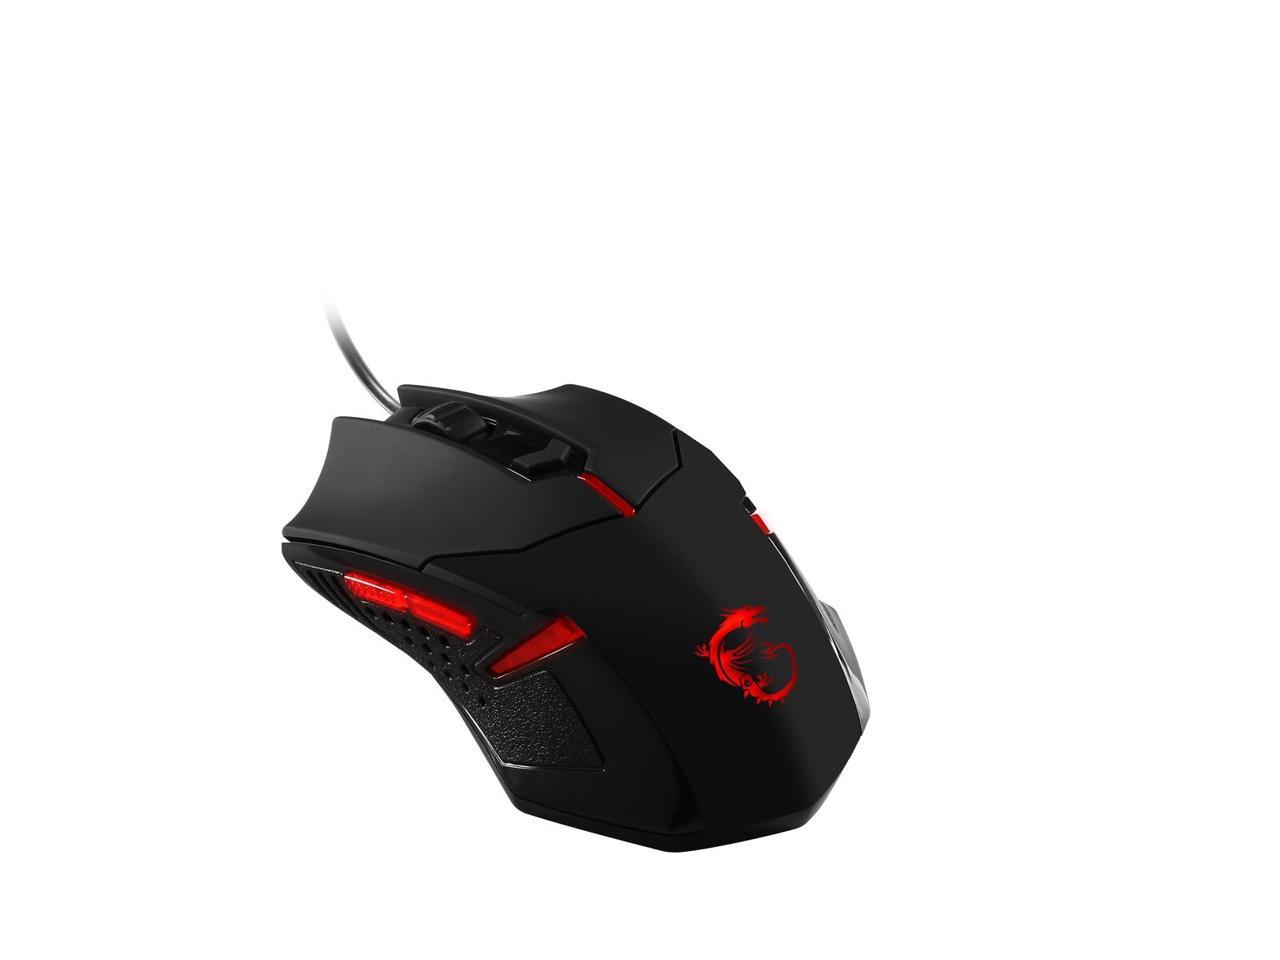 msi ds b1 gaming mouse software download